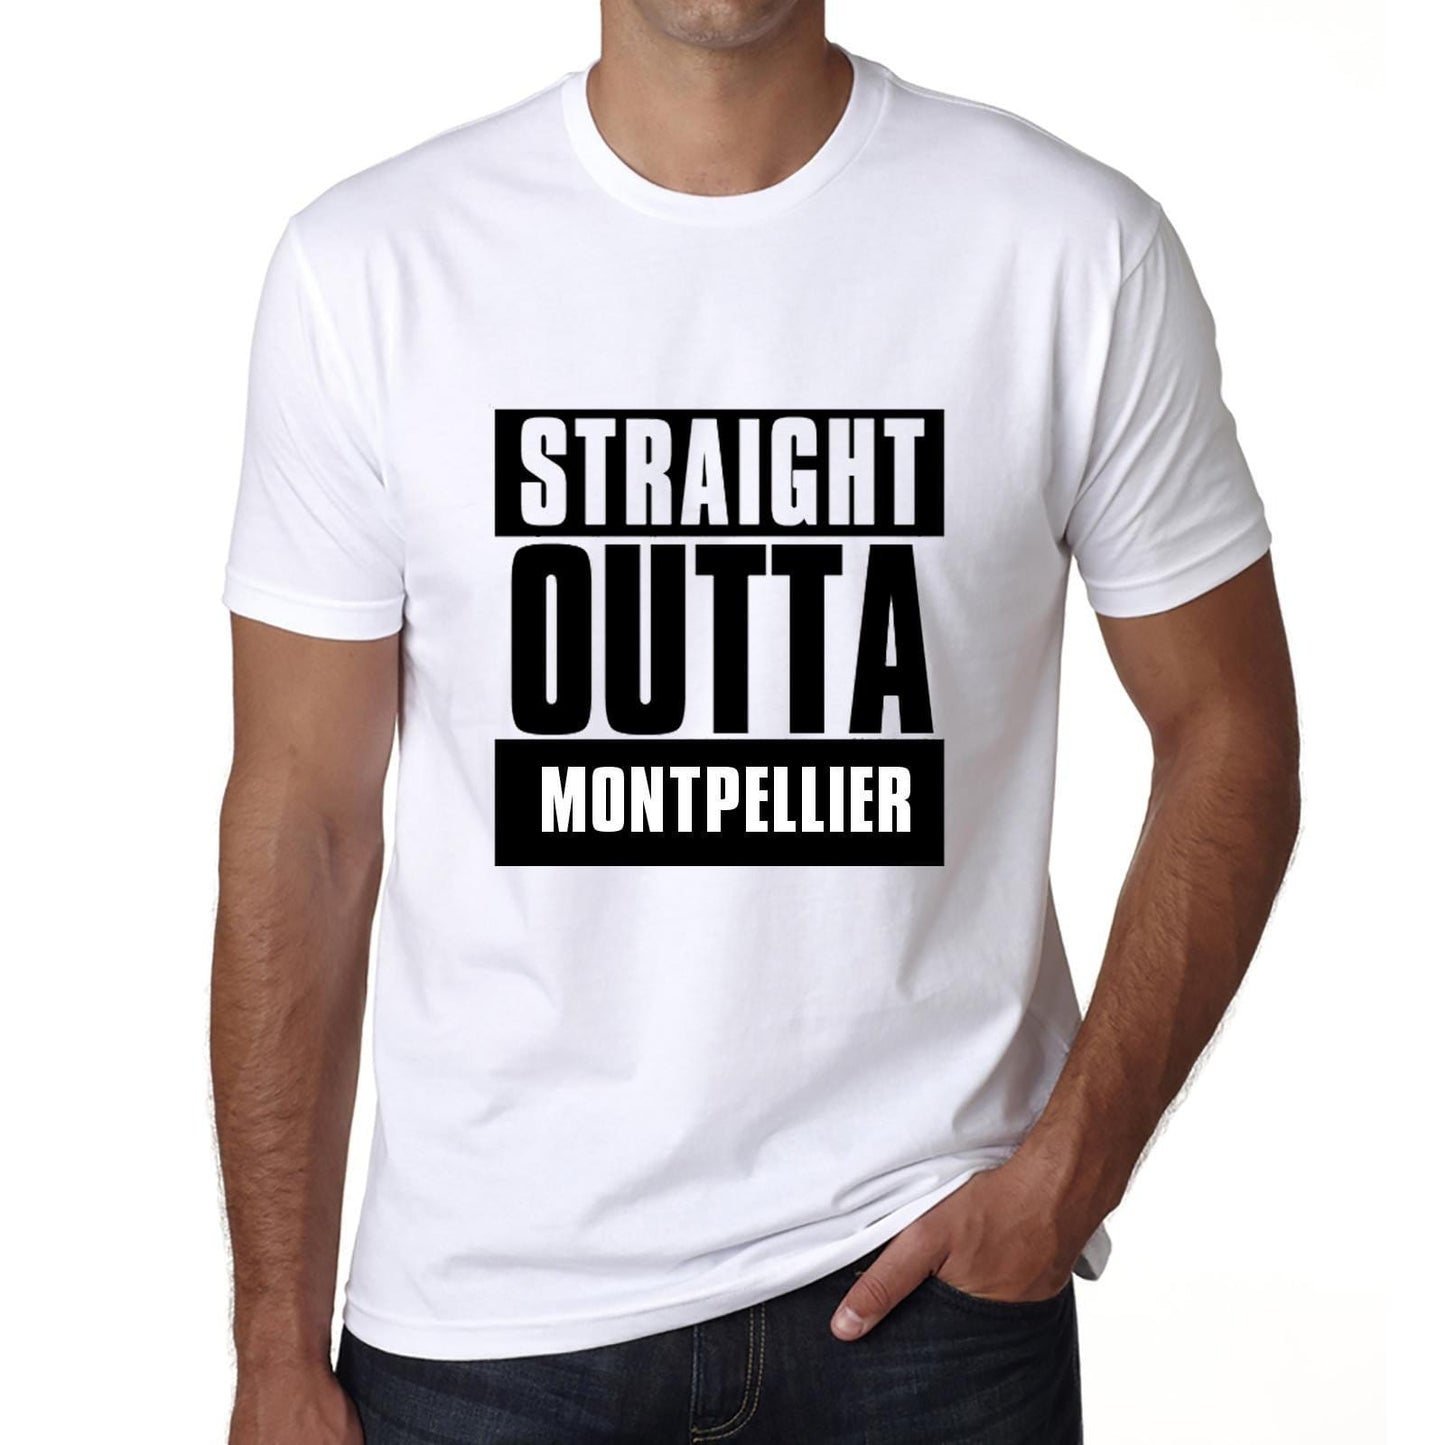 Straight Outta Montpellier, t Shirt Homme, t Shirt Straight Outta, Cadeau Homme